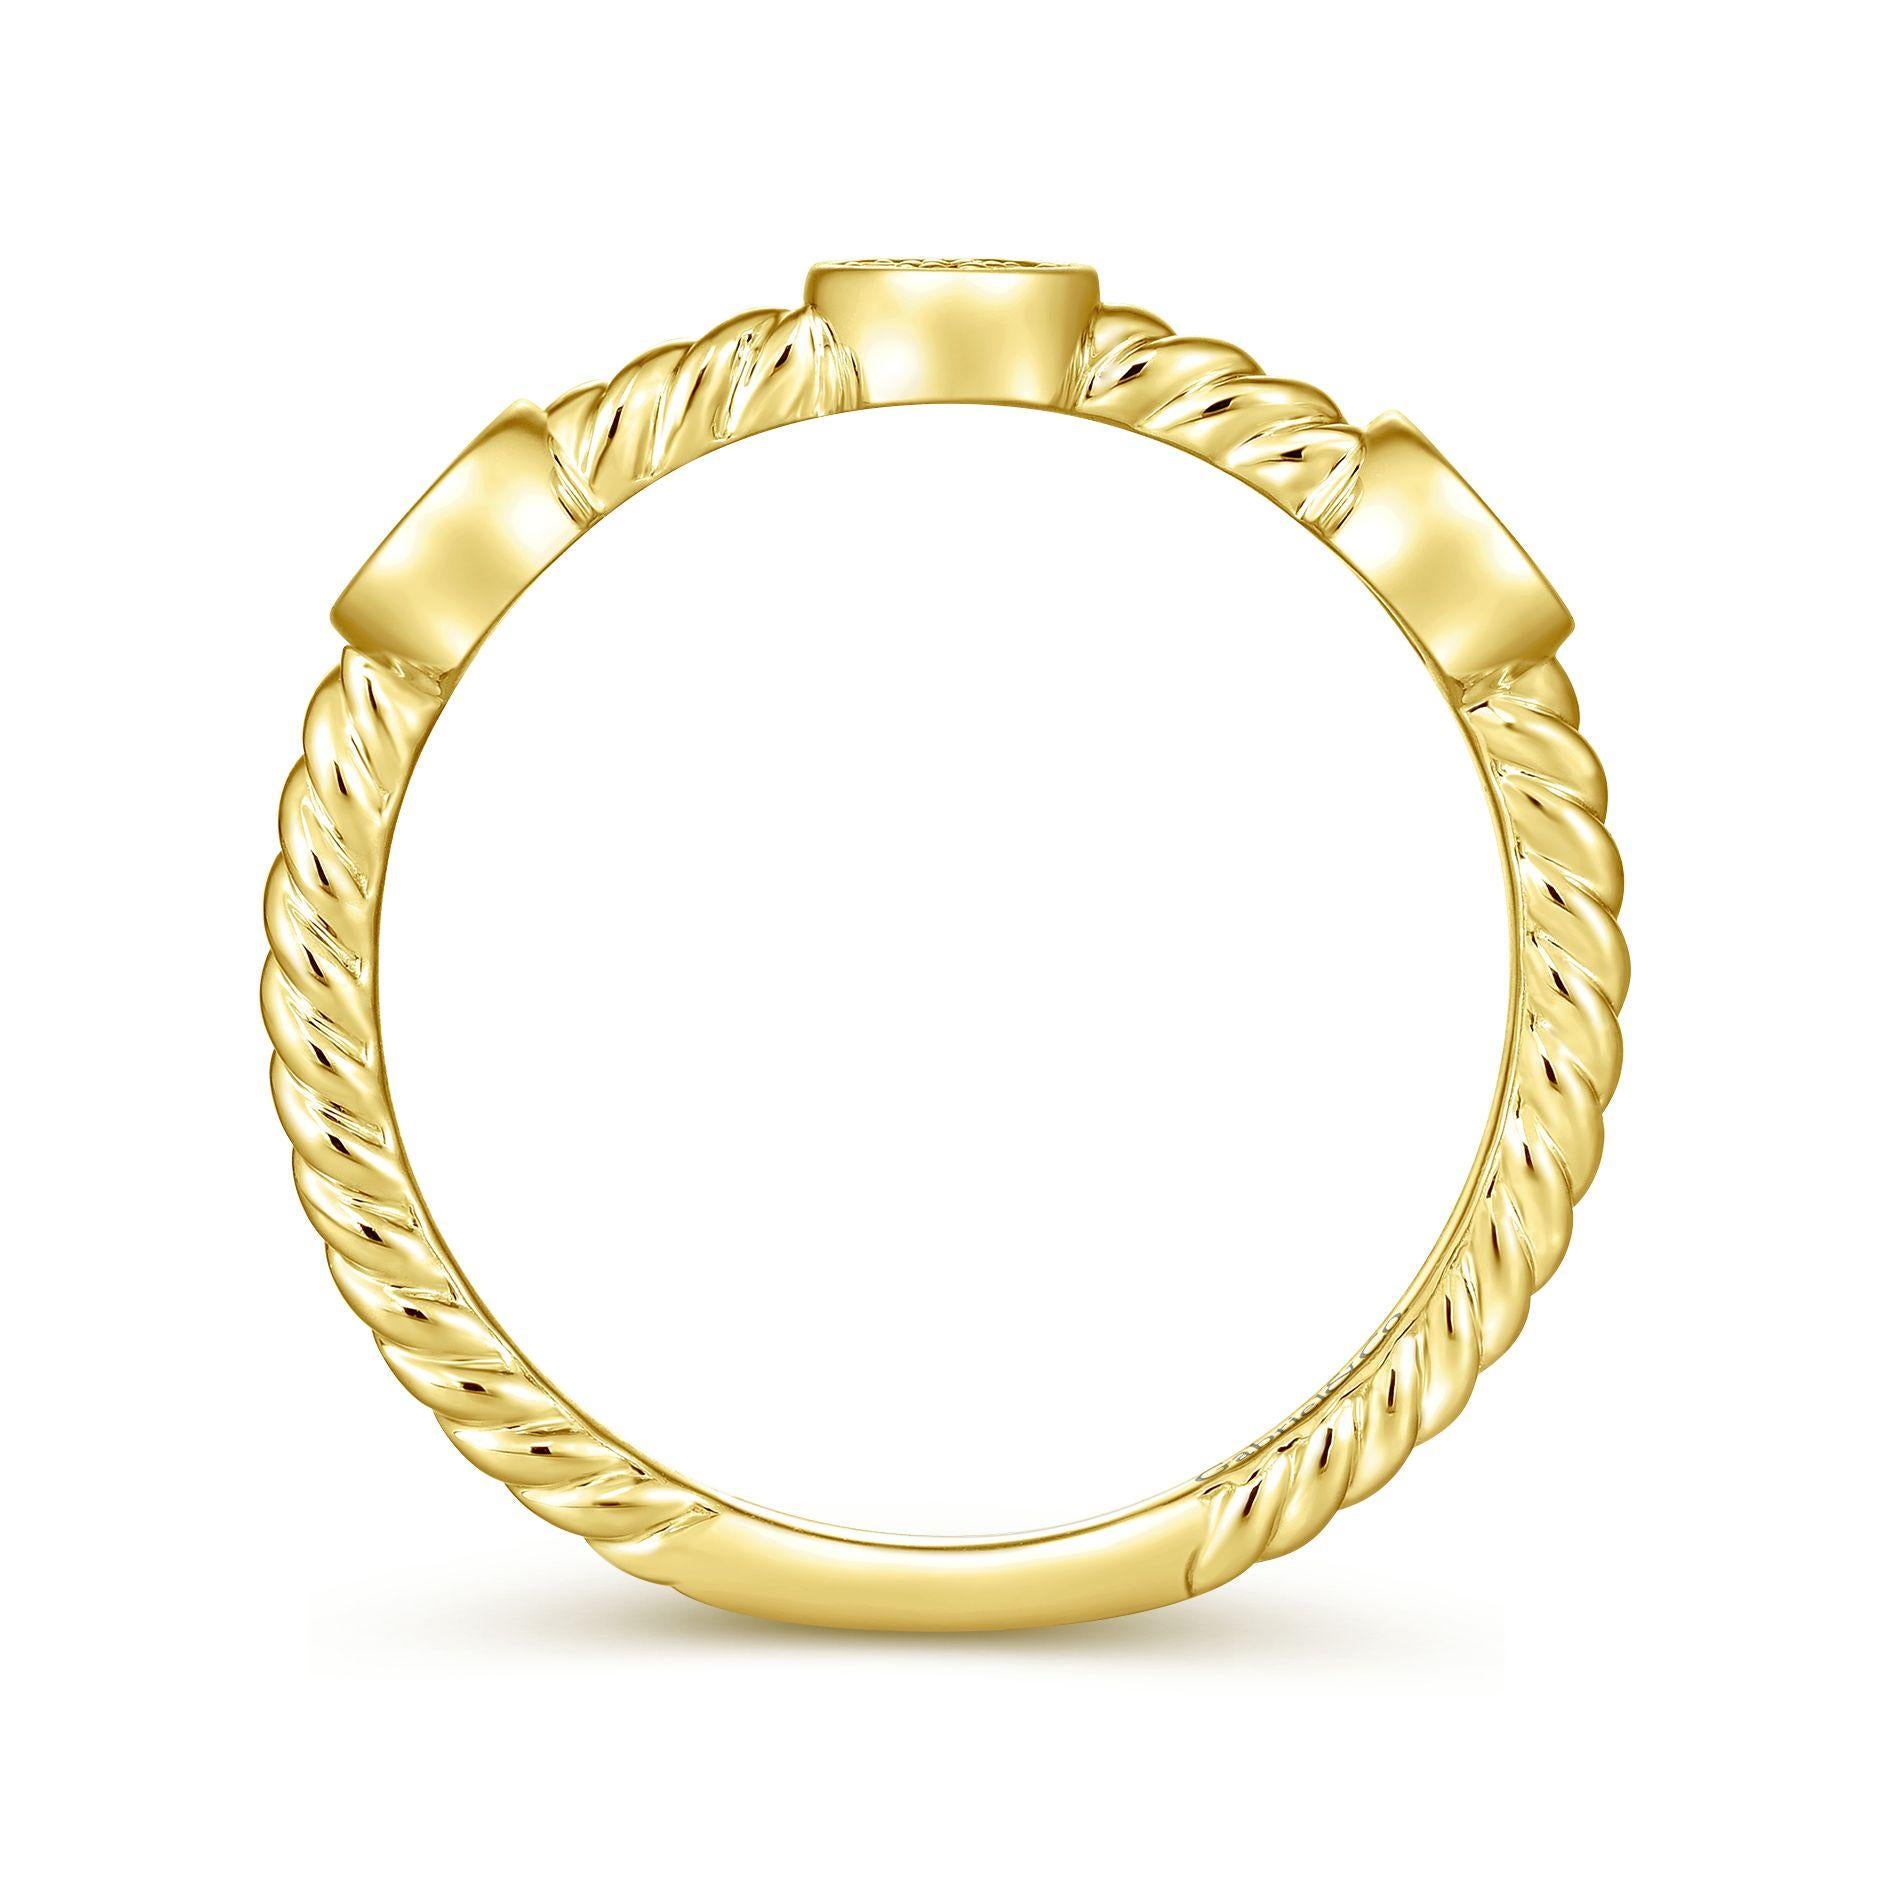 Gabriel & Co. LR51174Y45JJ 14k Yellow Gold 0.43ctw Diamond Stackable Band
Brand Gabriel & Co.
Vendor Model#LR51174Y45JJ
Material14k Yellow Gold (also available in 14k white gold and 14k rose gold)
Size	6.5 (can be sized)
Diamond Details approx.